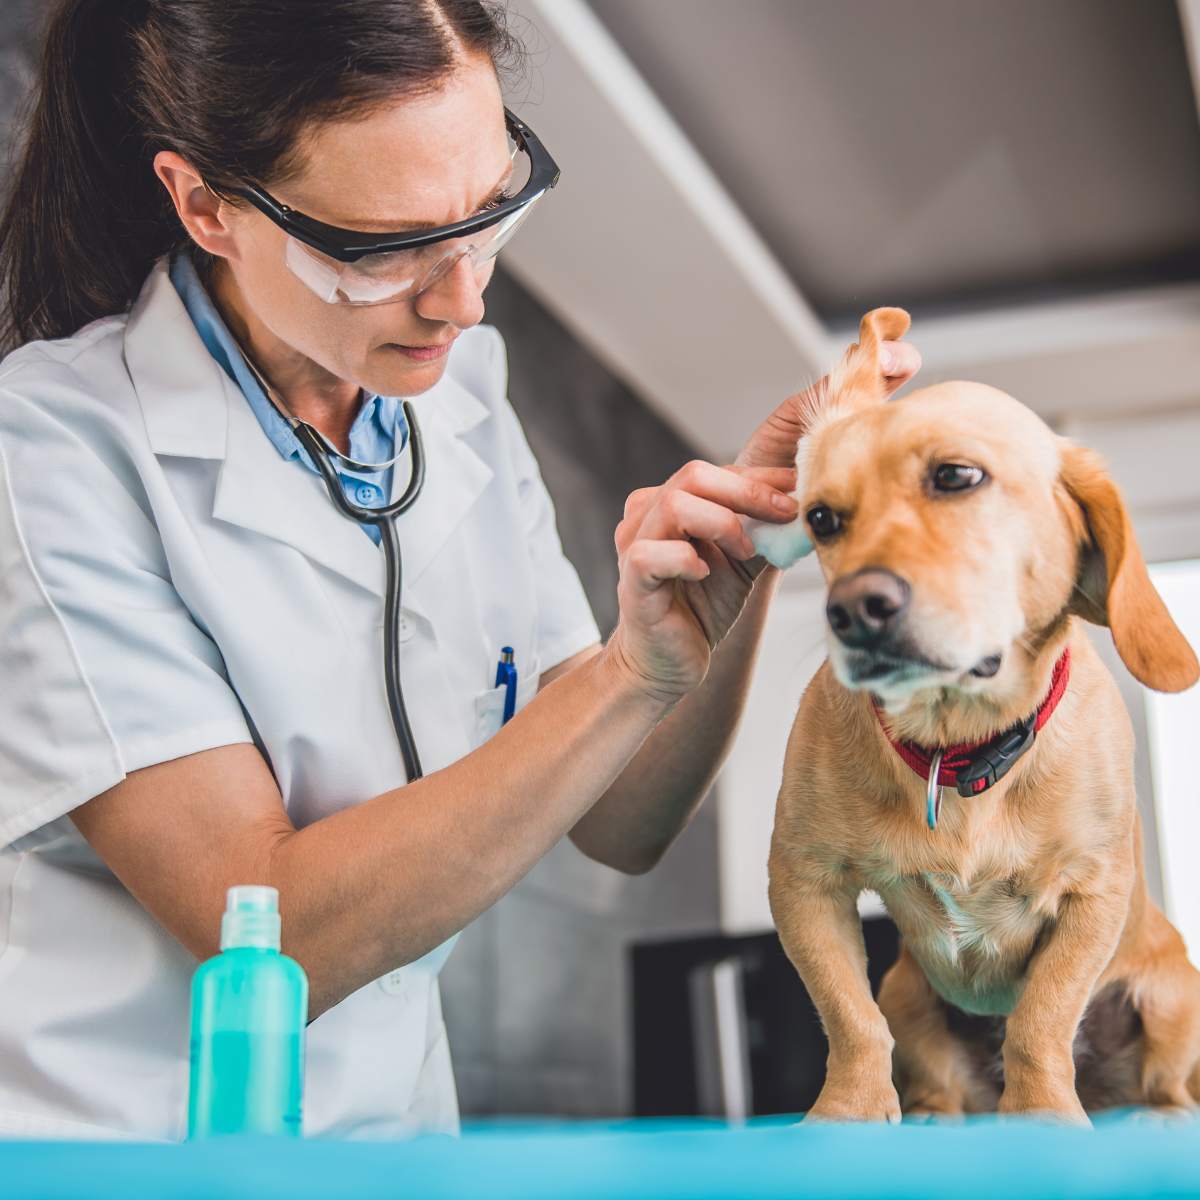 Woman dressed like a veterinarian cleaning a dog's ears with vinegar on cotton ball.